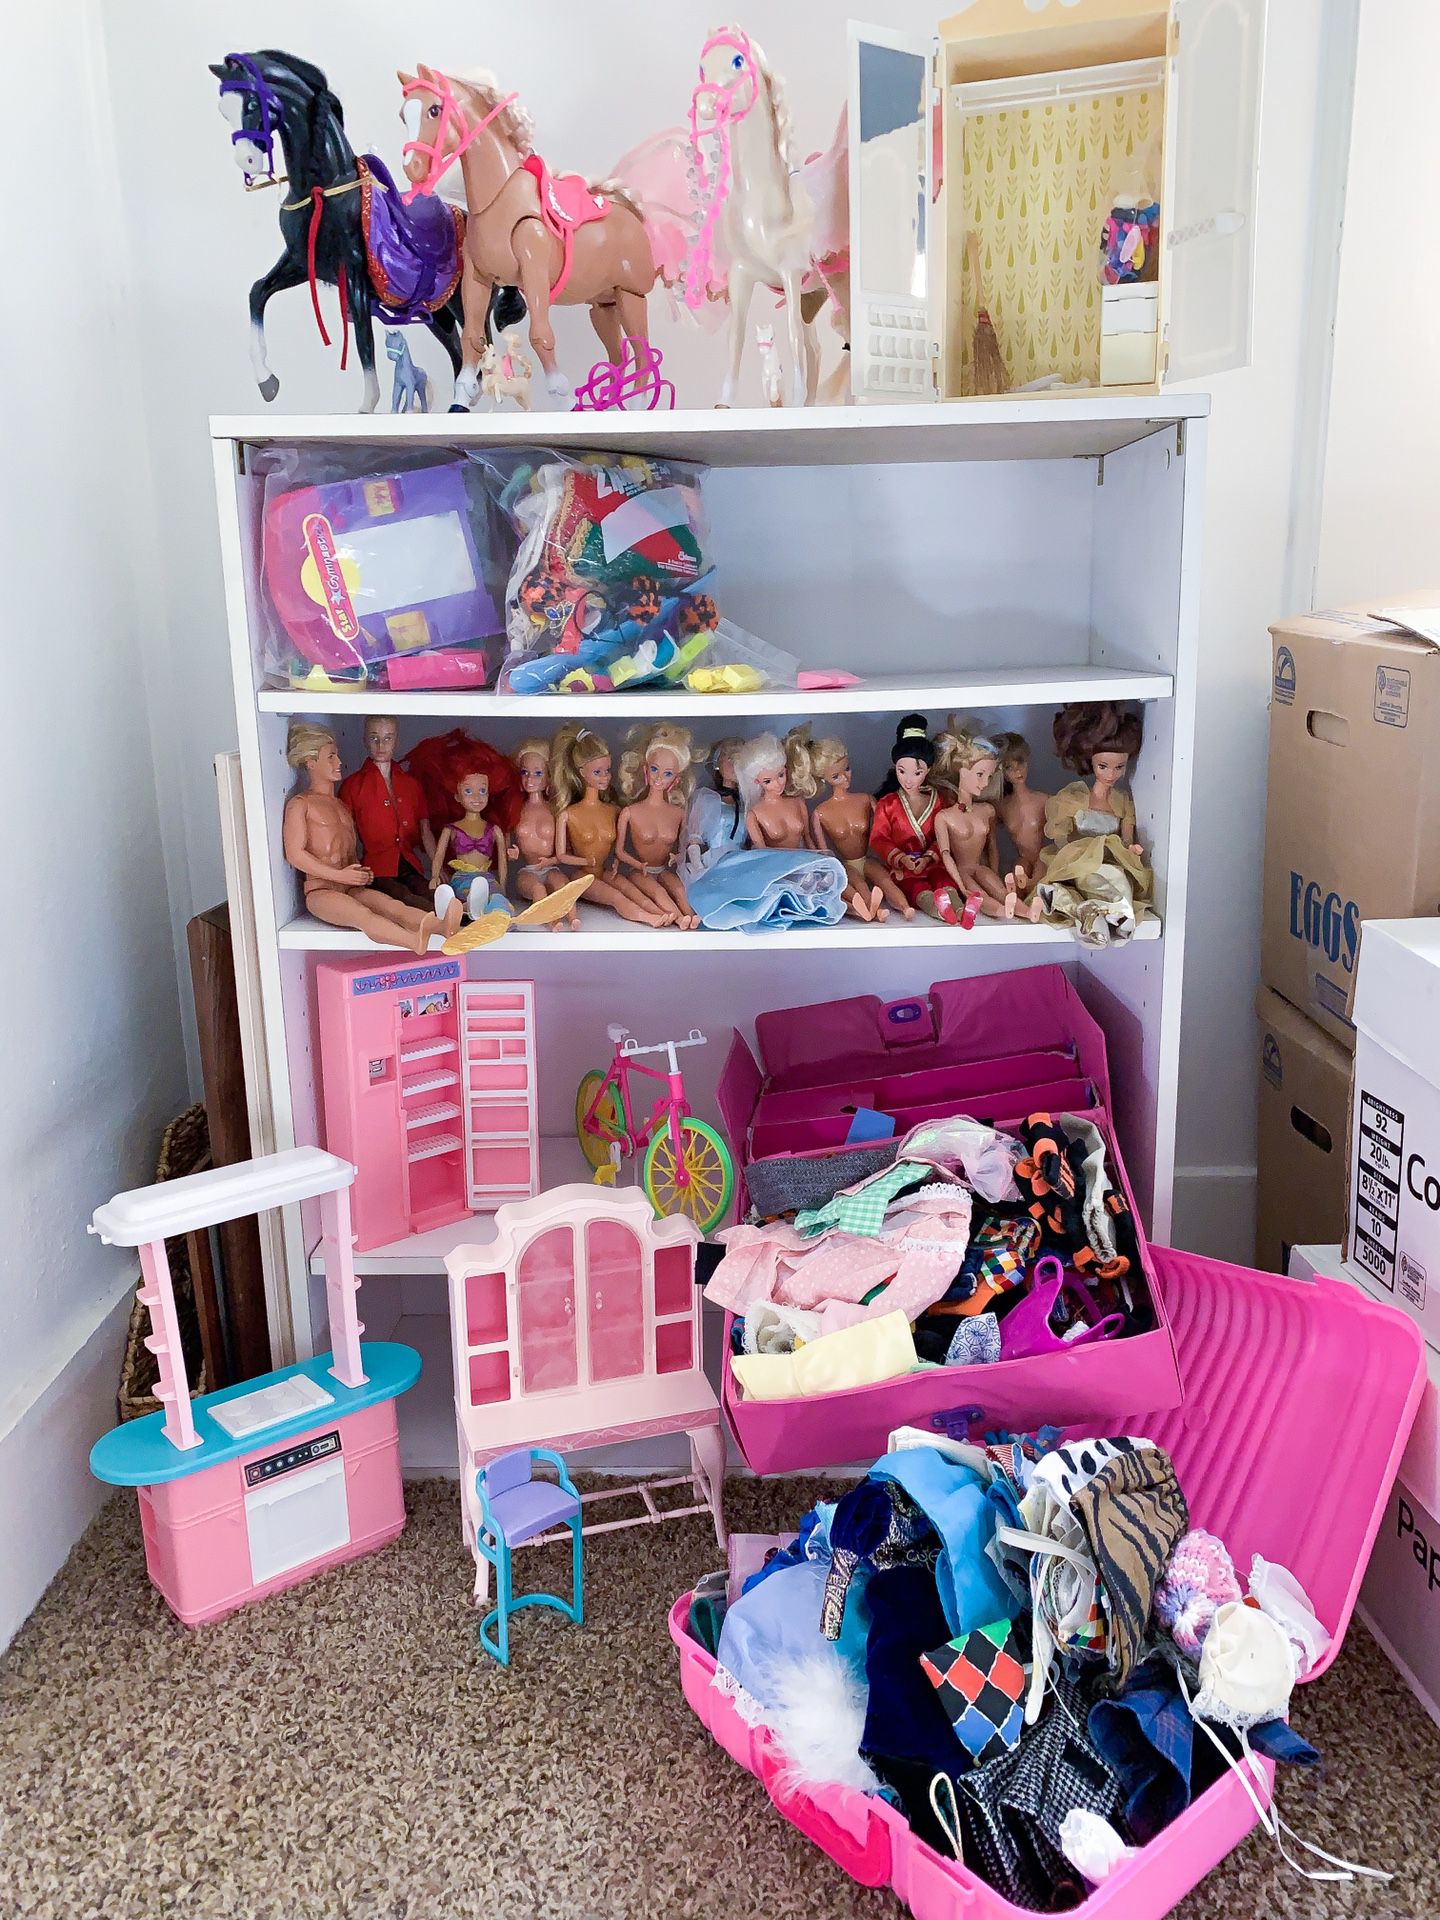 LOTS of Barbie dolls and accessories - SEE PHOTOS